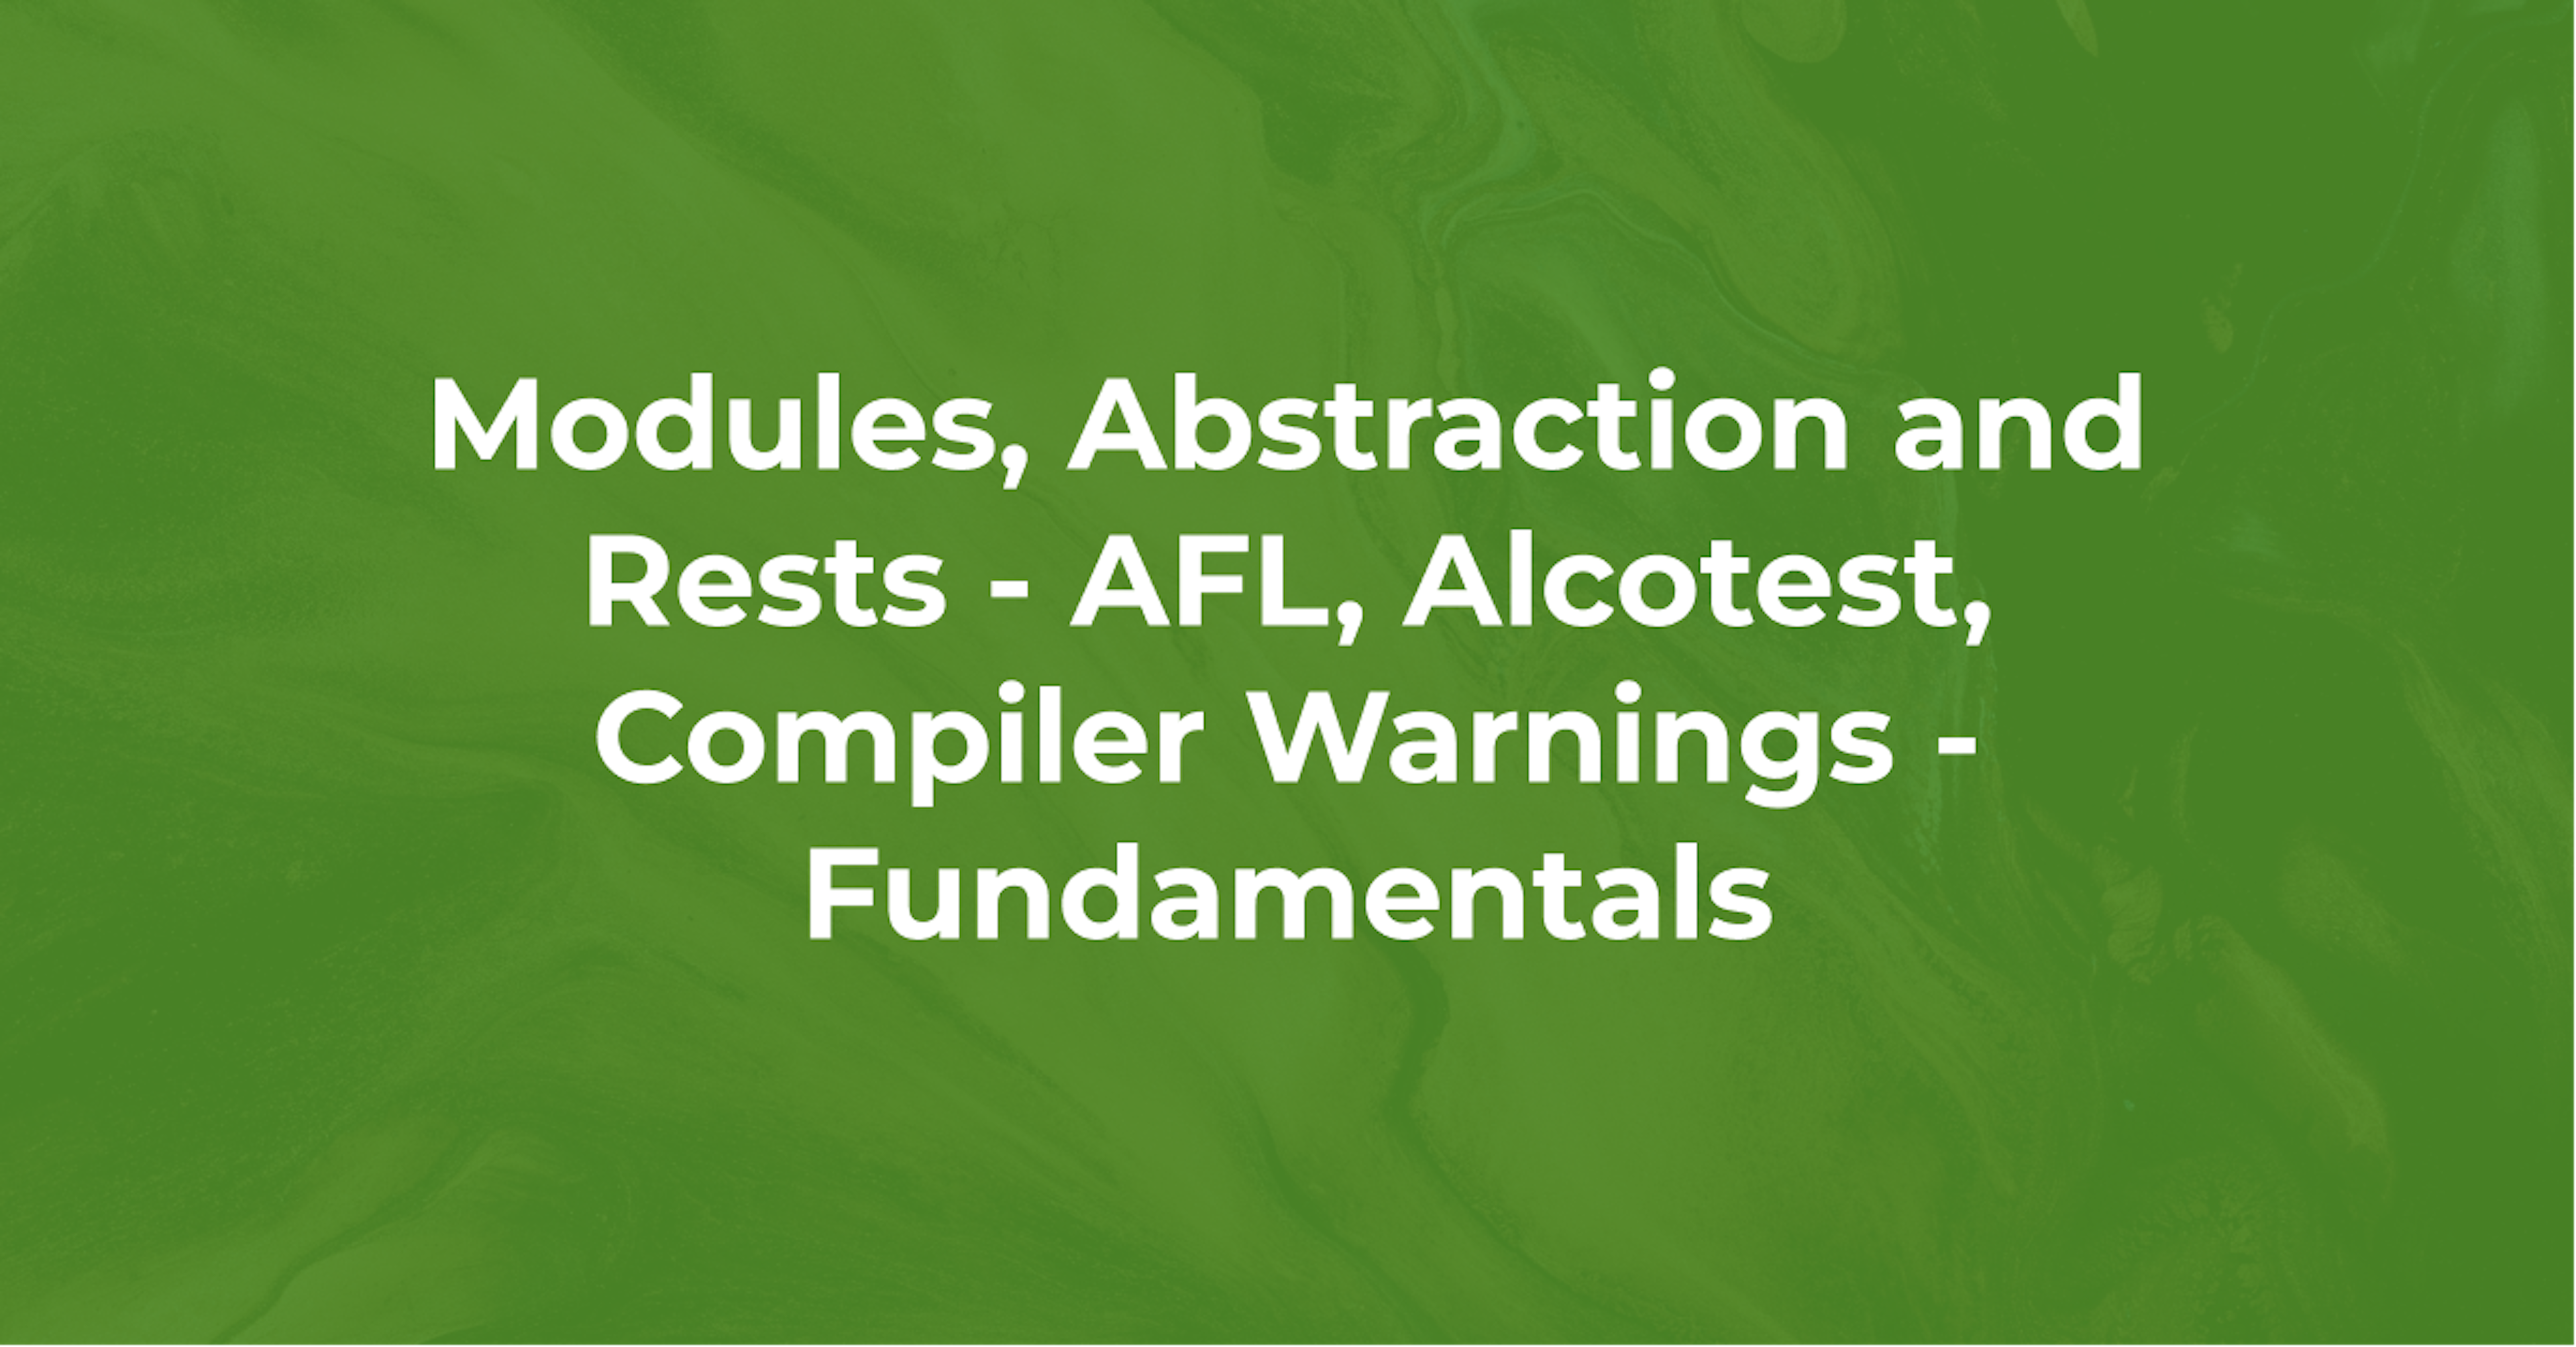 Modules, abstraction and tests - afl, alcotest, Compiler warnings - Fundamentals